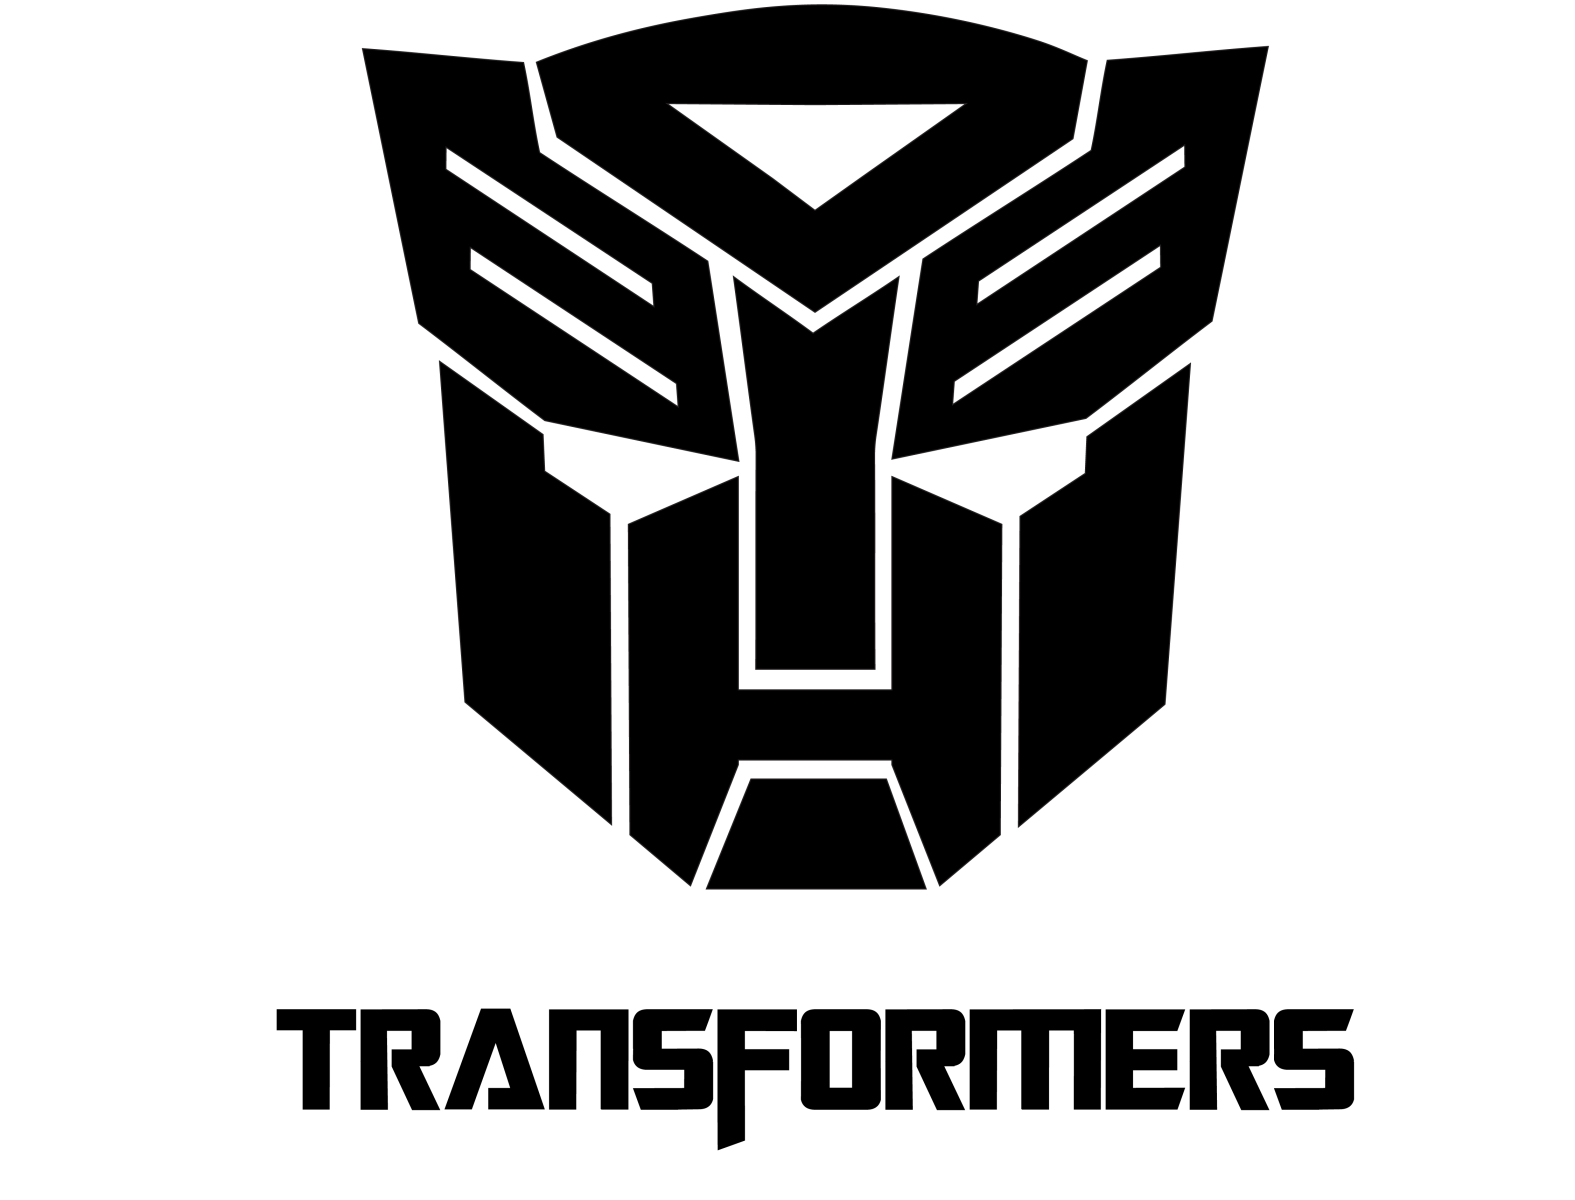 TRANSFORMERS LOGO by LogoGarbage on Dribbble